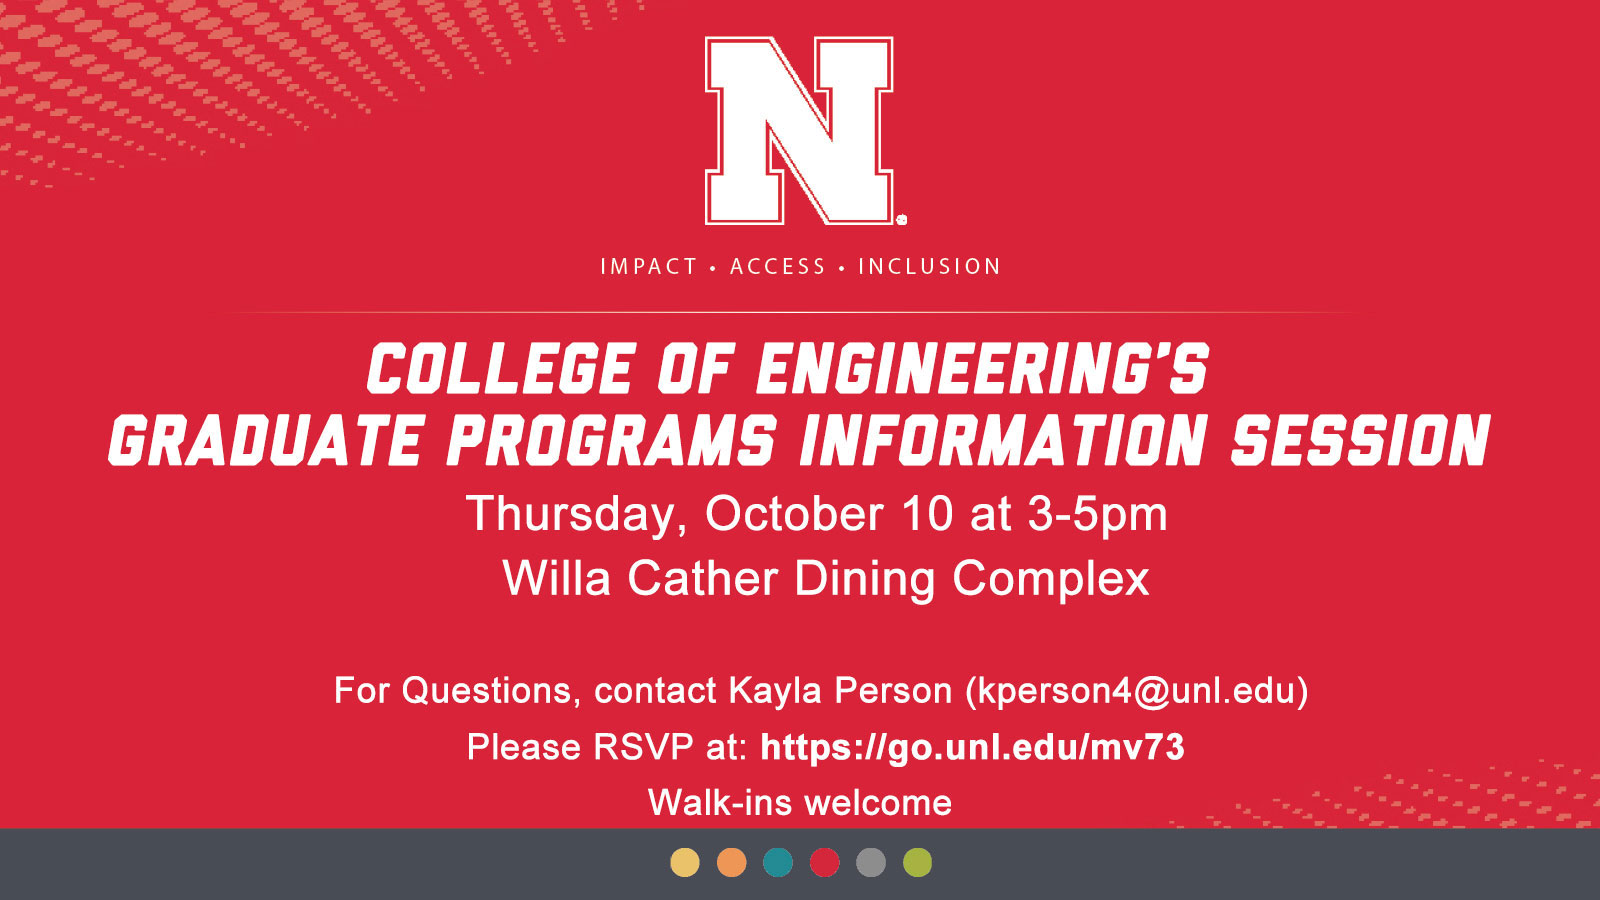 Graduate Programs Information Session is Oct. 10.